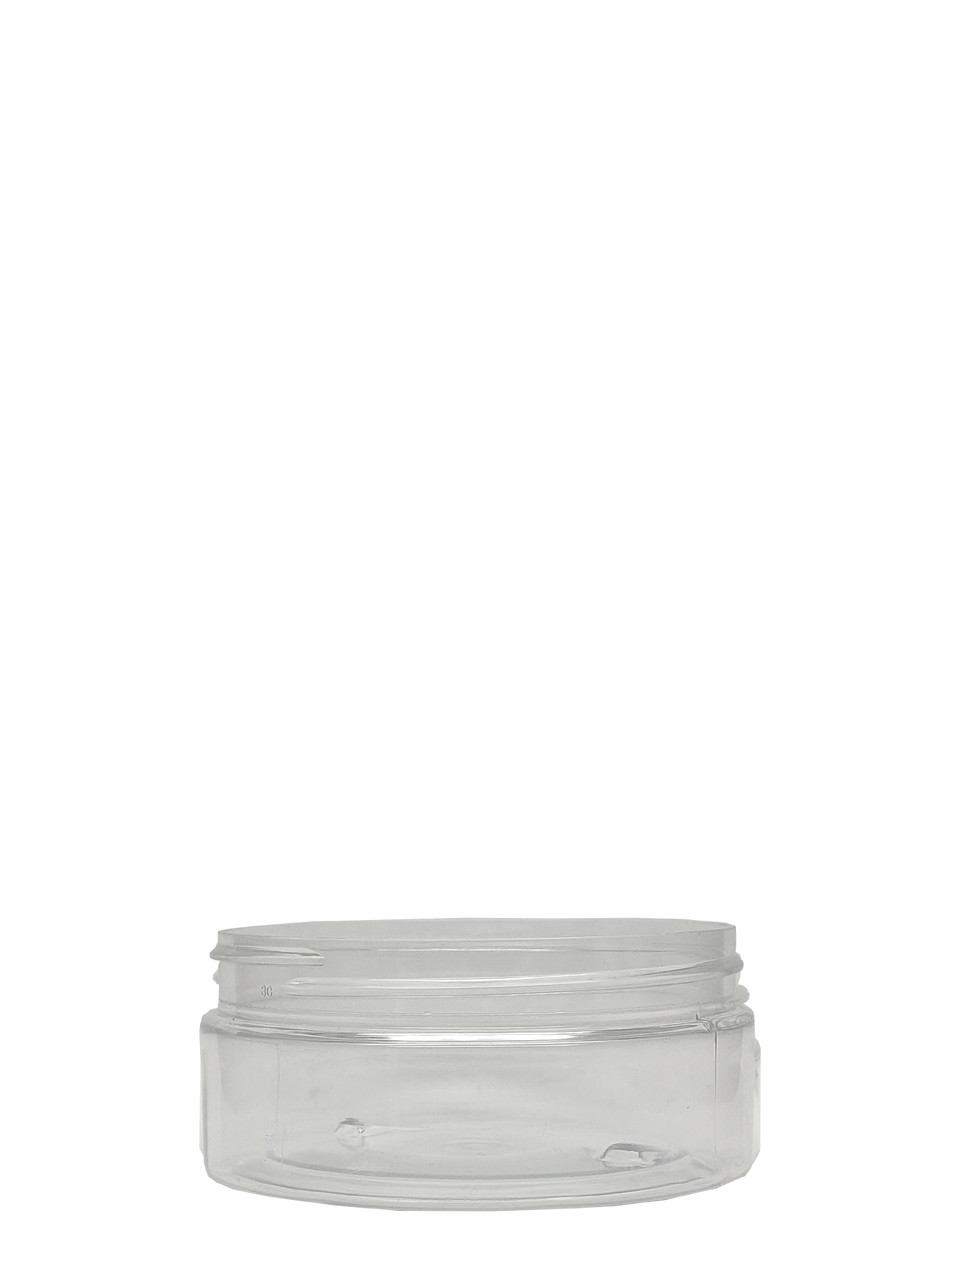 10 Ounce Plastic Jars Clear Plastic Mason Jars Storage Containers